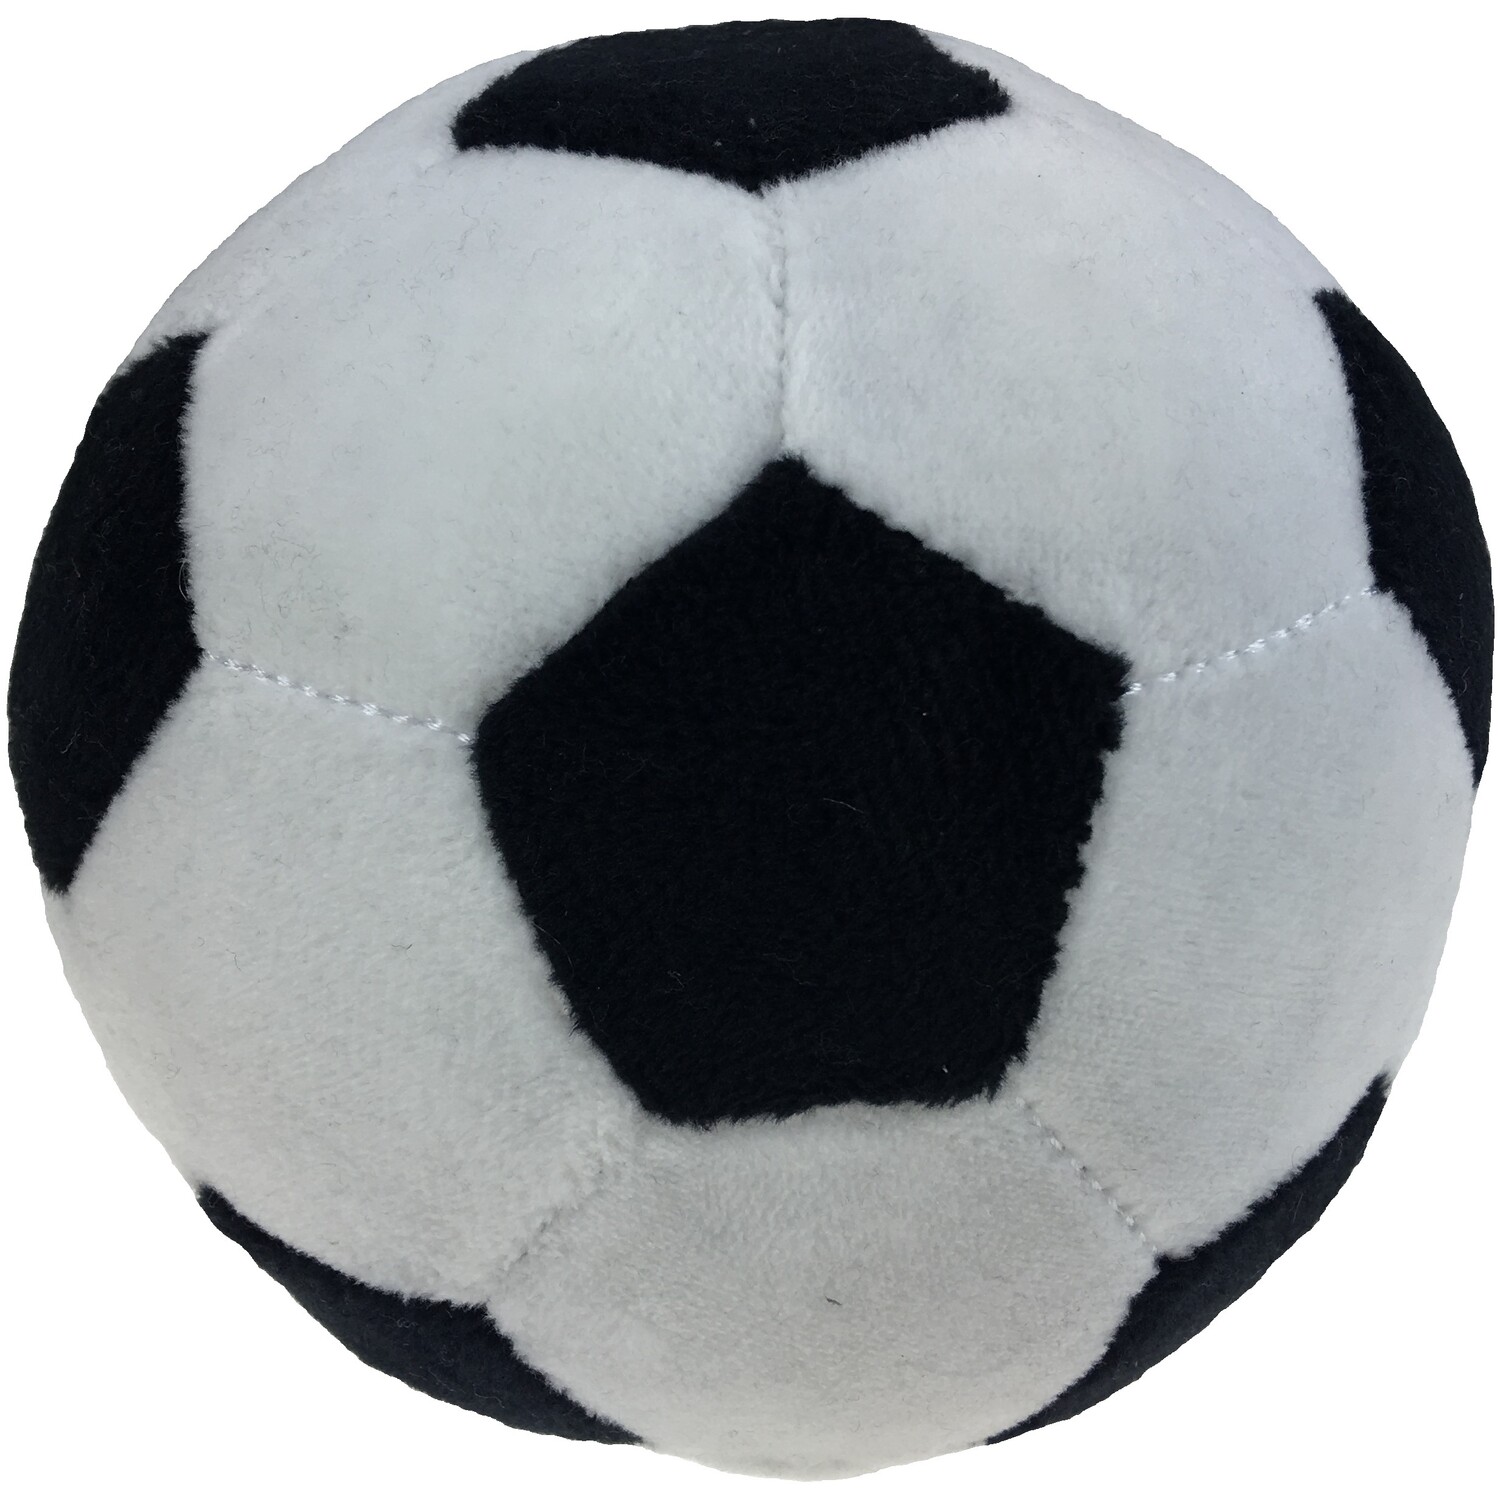 Clever Paws Plush Football Dog Toy Image